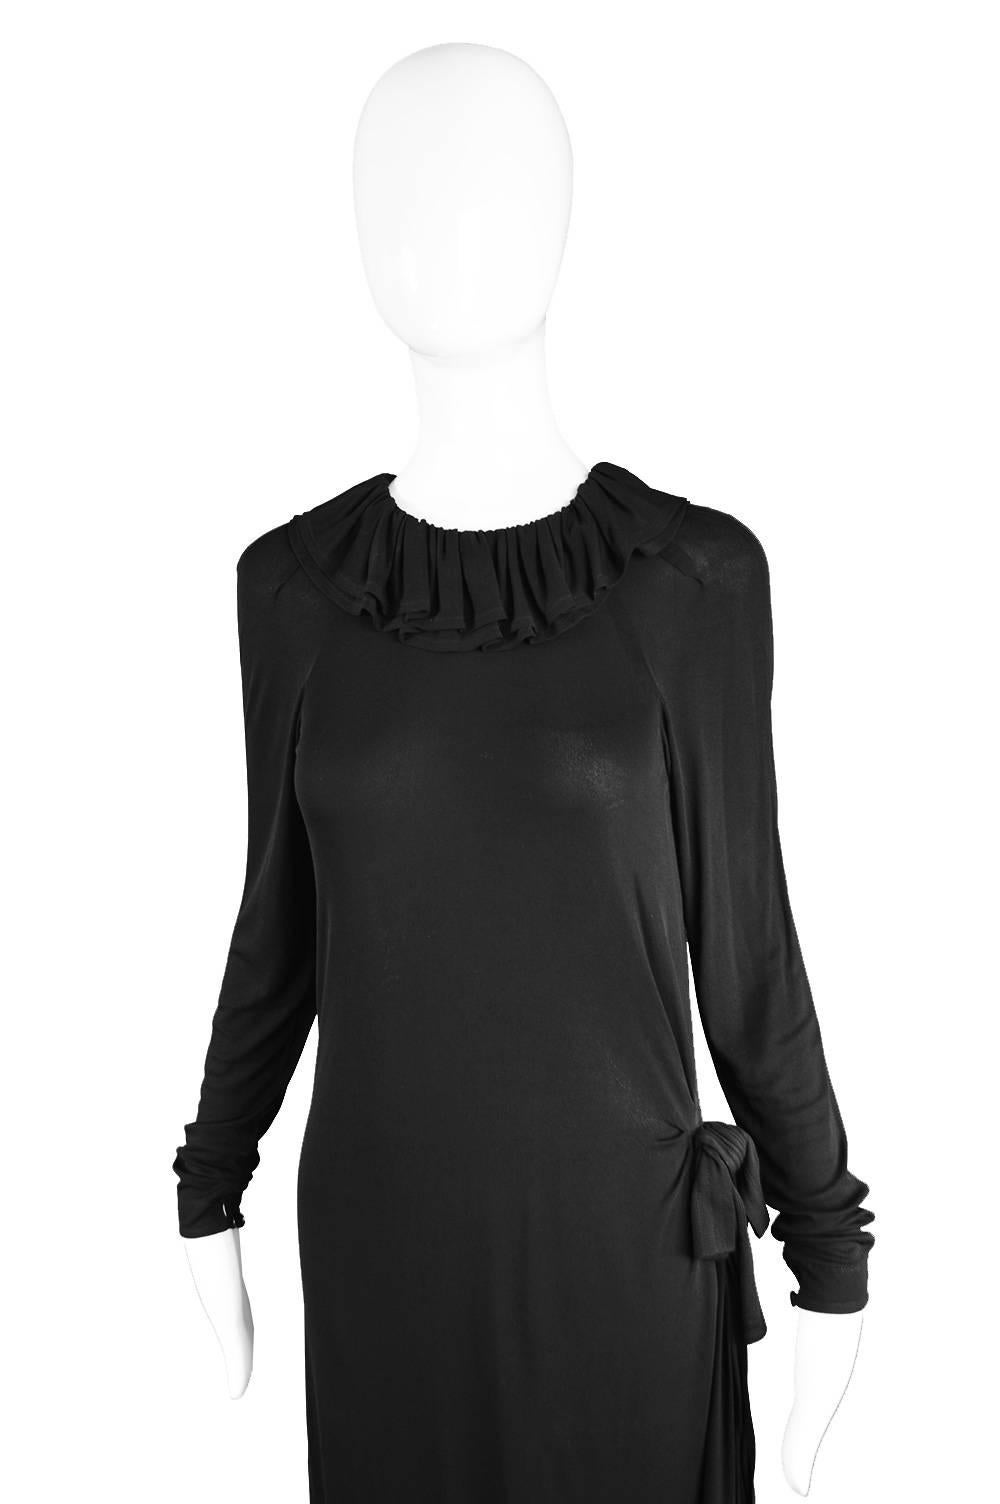 Jean Muir Black Draped Rayon Jersey Vintage Dress with Side Train, 1970s For Sale 1